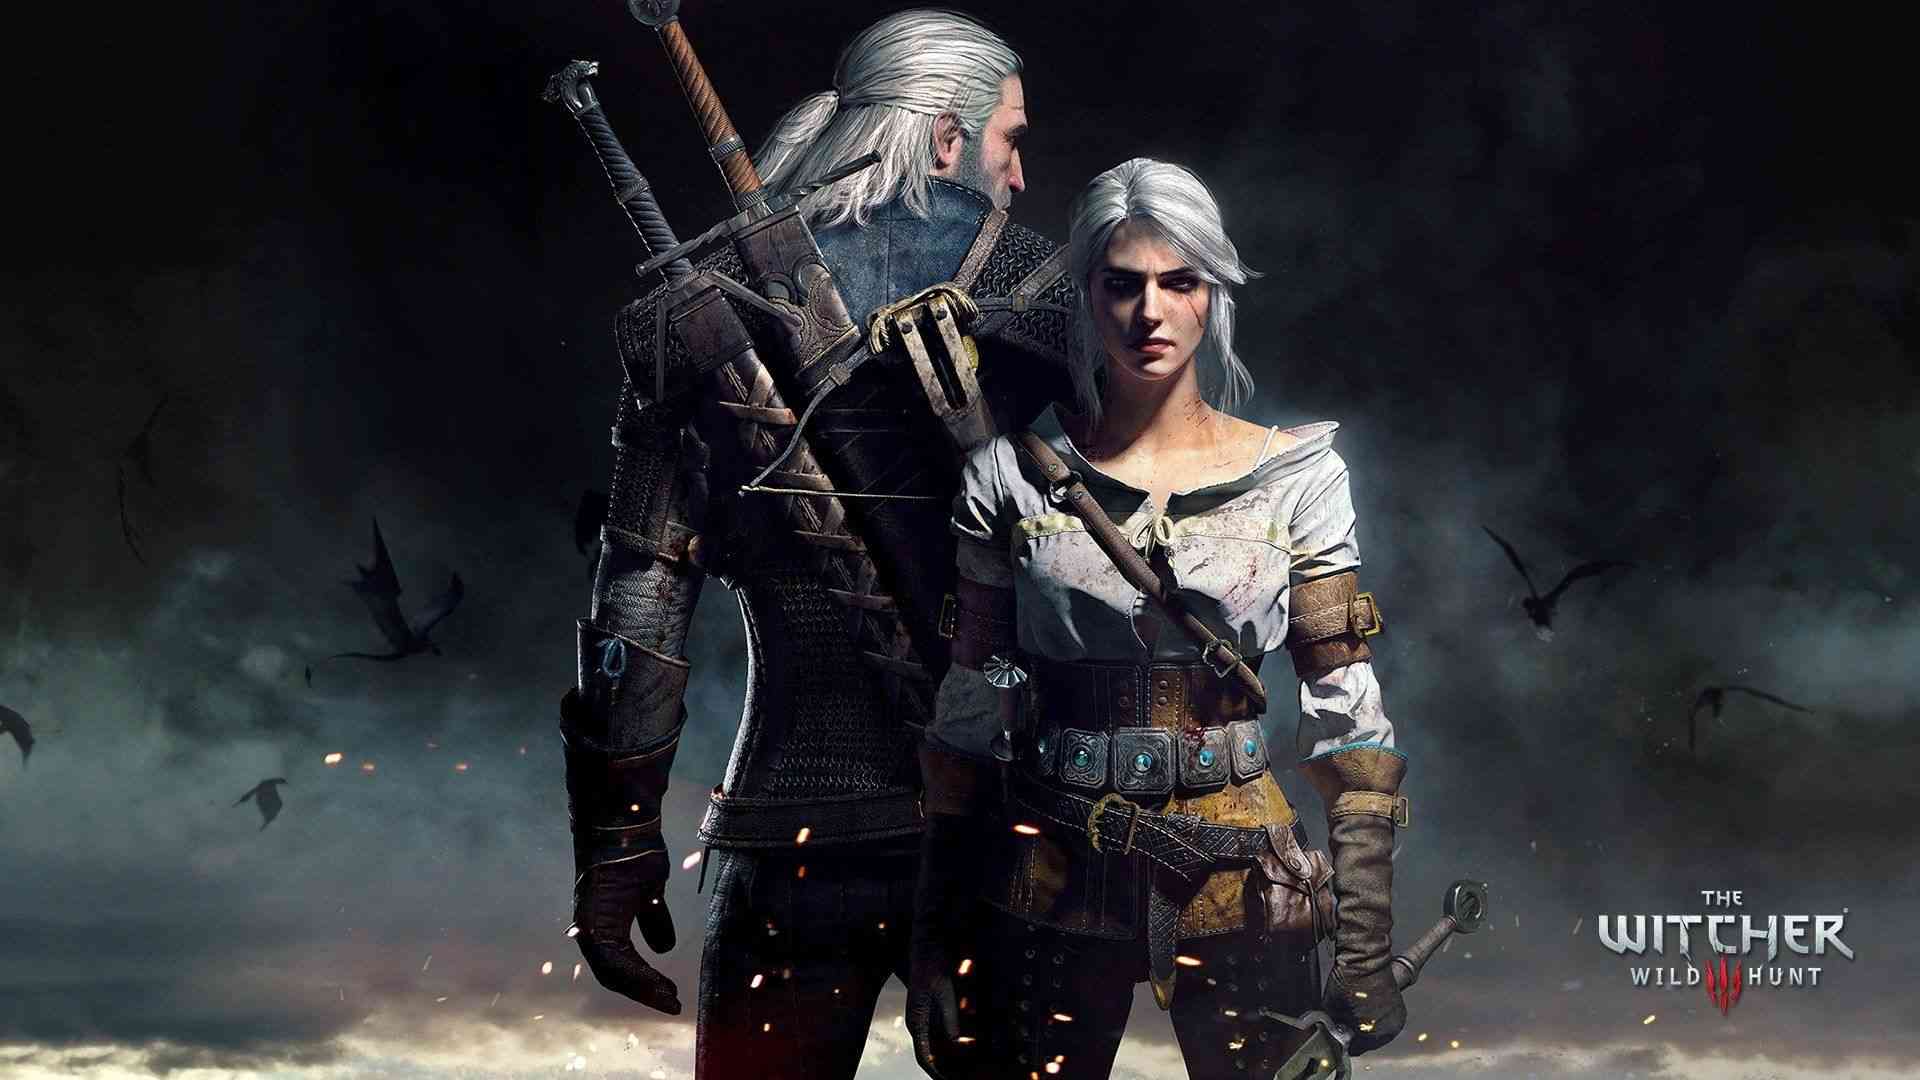 the witcher 3 dominates the uk charts with the nintendo switch version 3424 big 1